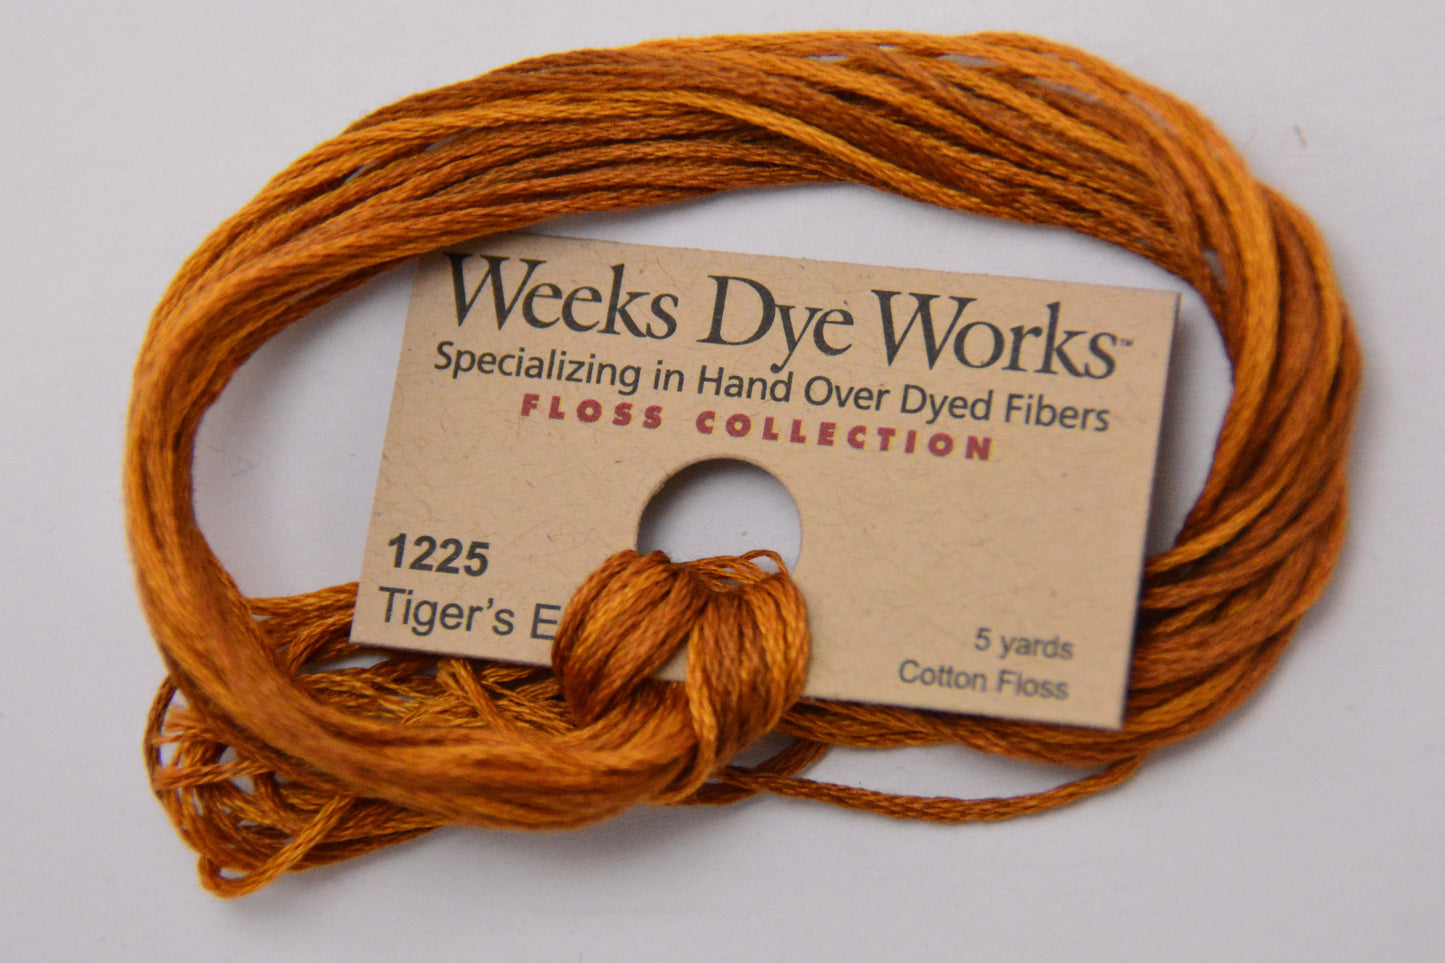 Tiger’s Eye 1225 Weeks Dye Works 6-Strand Hand-Dyed Embroidery Floss